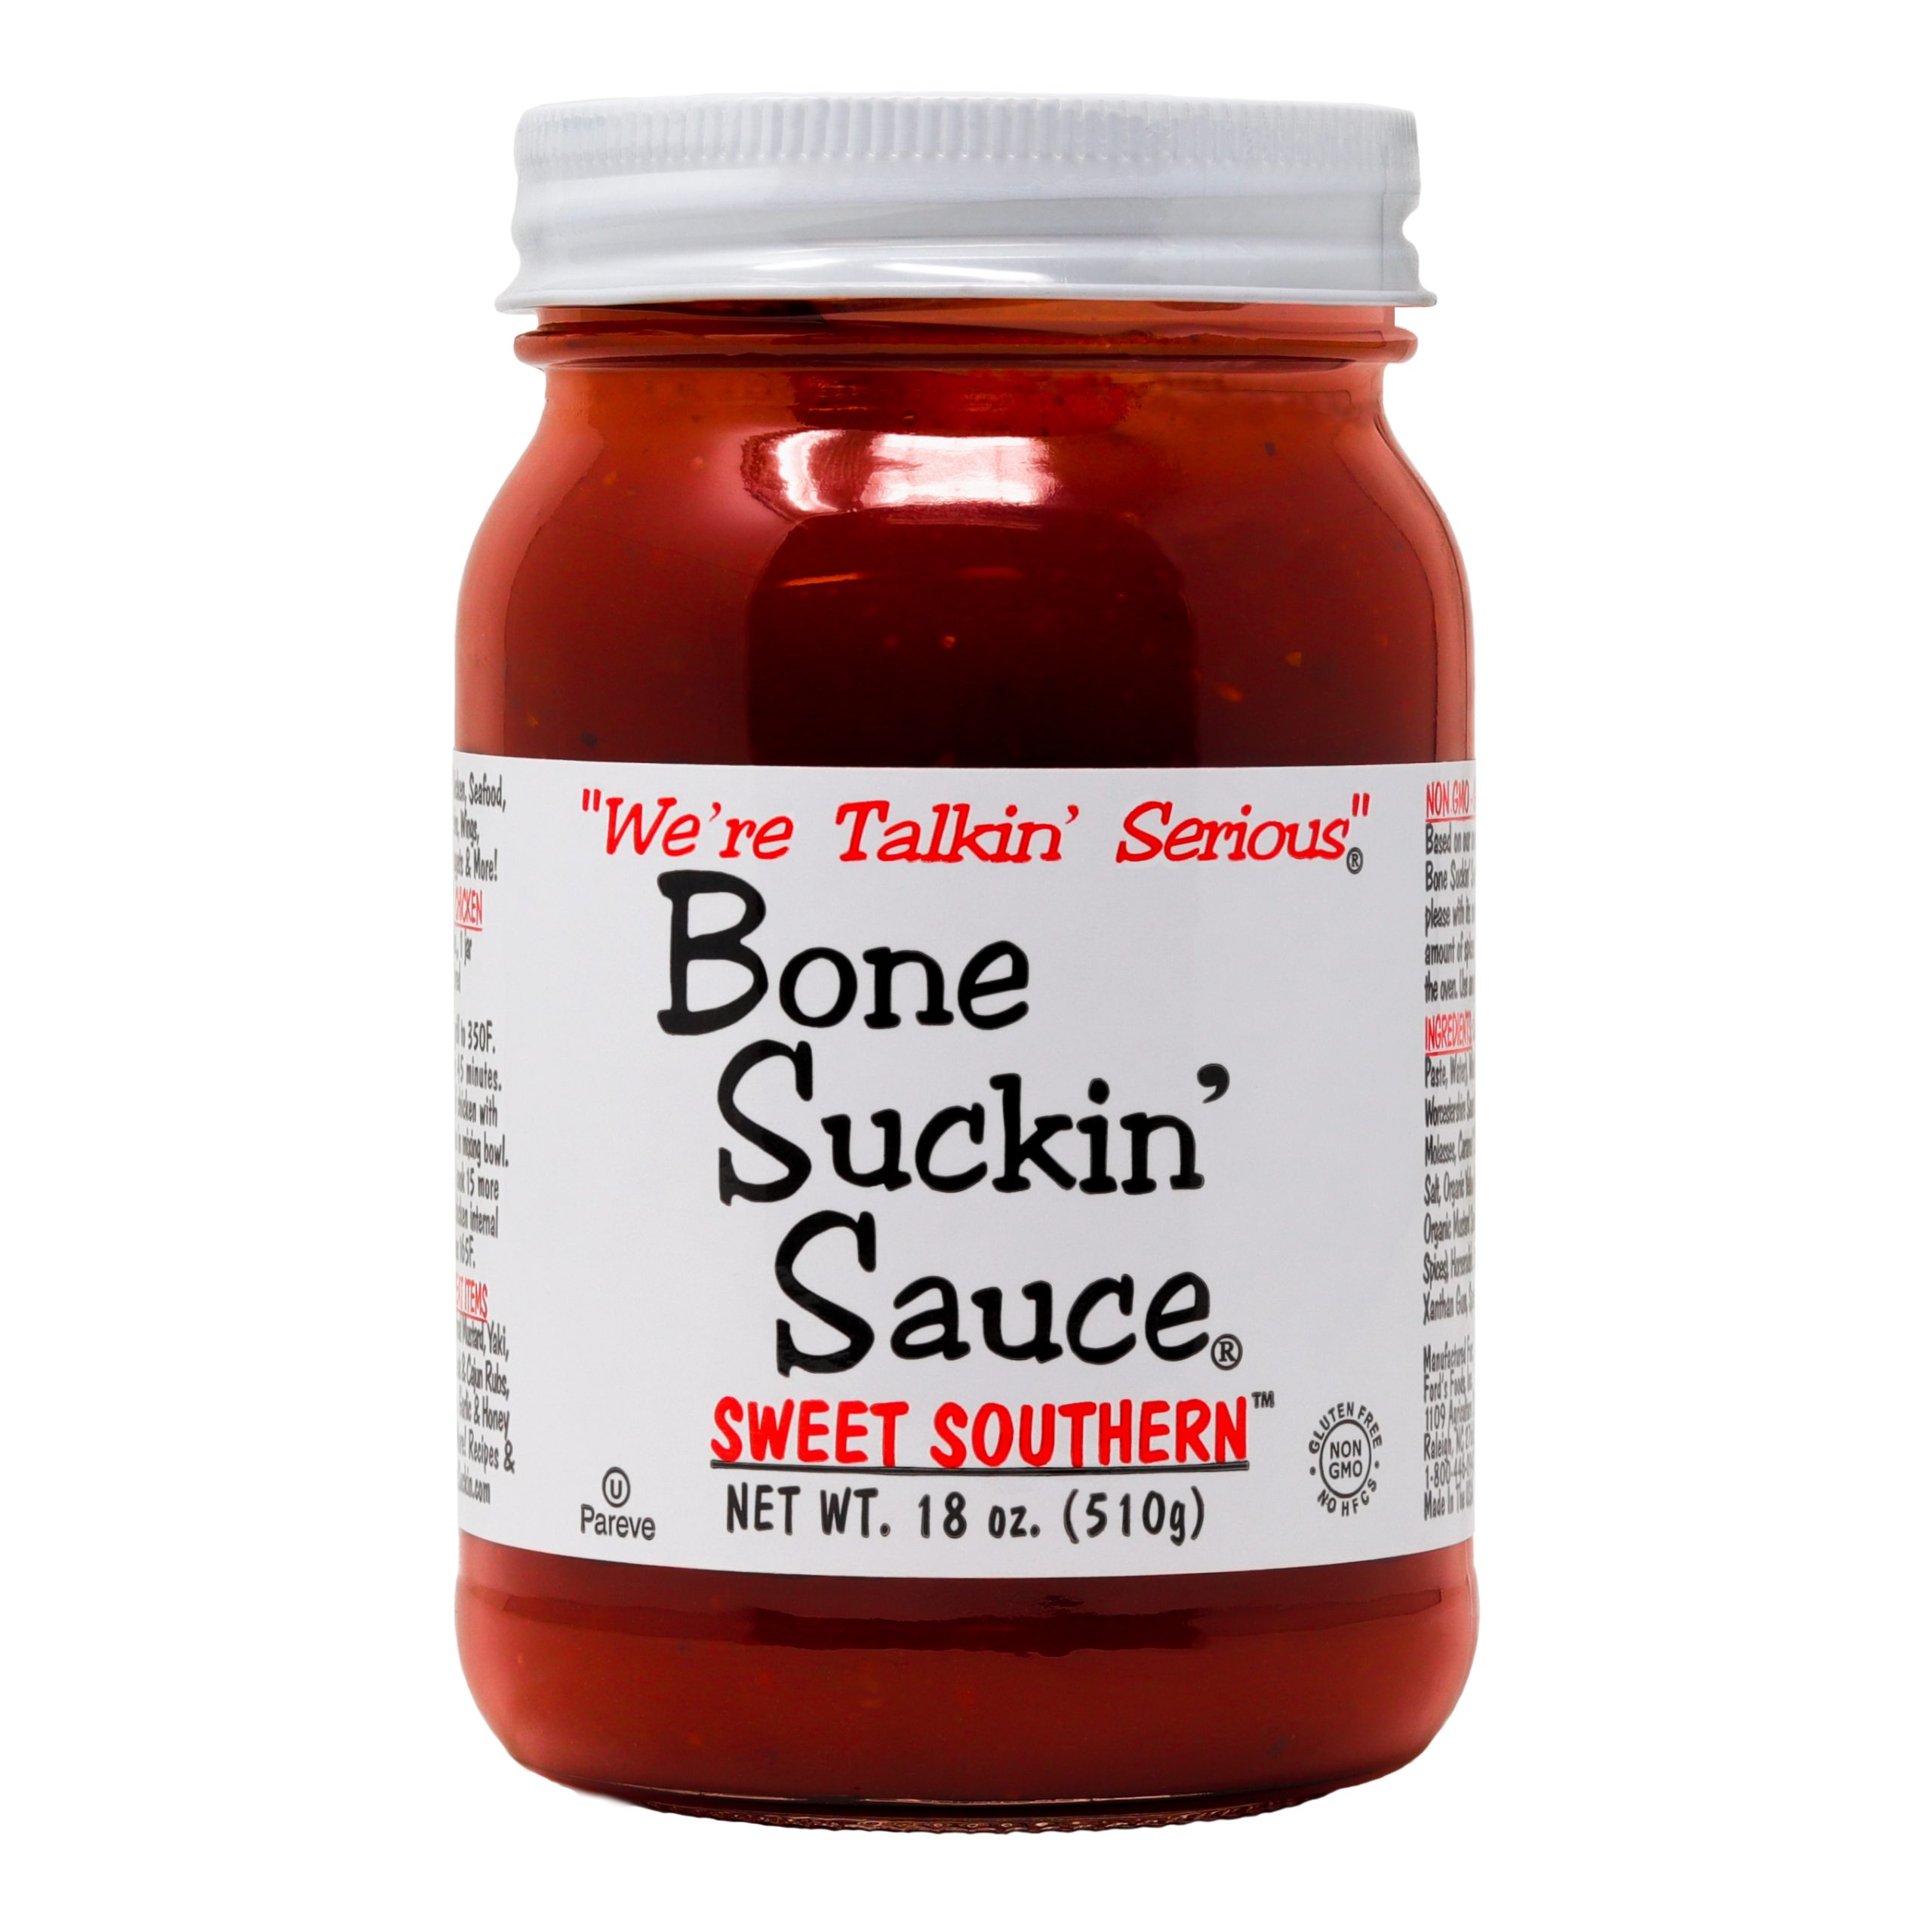 Bone Suckin' Sweet Southern Jar
Bone Suckin' Sauce Sweet Southern BBQ Sauce - 18 oz in Glass Bottle, All-Purpose Barbecue Sauce, For Ribs, Chicken, Pork, Beef, Gluten-Free, Non-GMO, Kosher, Sweetened w/ Cane Sugar & Molasses - 1 Pc

Bone Suckin' Sauce®, Sweet Southern® 18 oz., Based on our award winning family recipe, our Bone Suckin’ Sauce®, Sweet Southern® is guaranteed to please with its sweetness, flavor & just the right amount of spices. Great for grilling & using in the oven. Use amply for that Bone Suckin’ Flavor®!